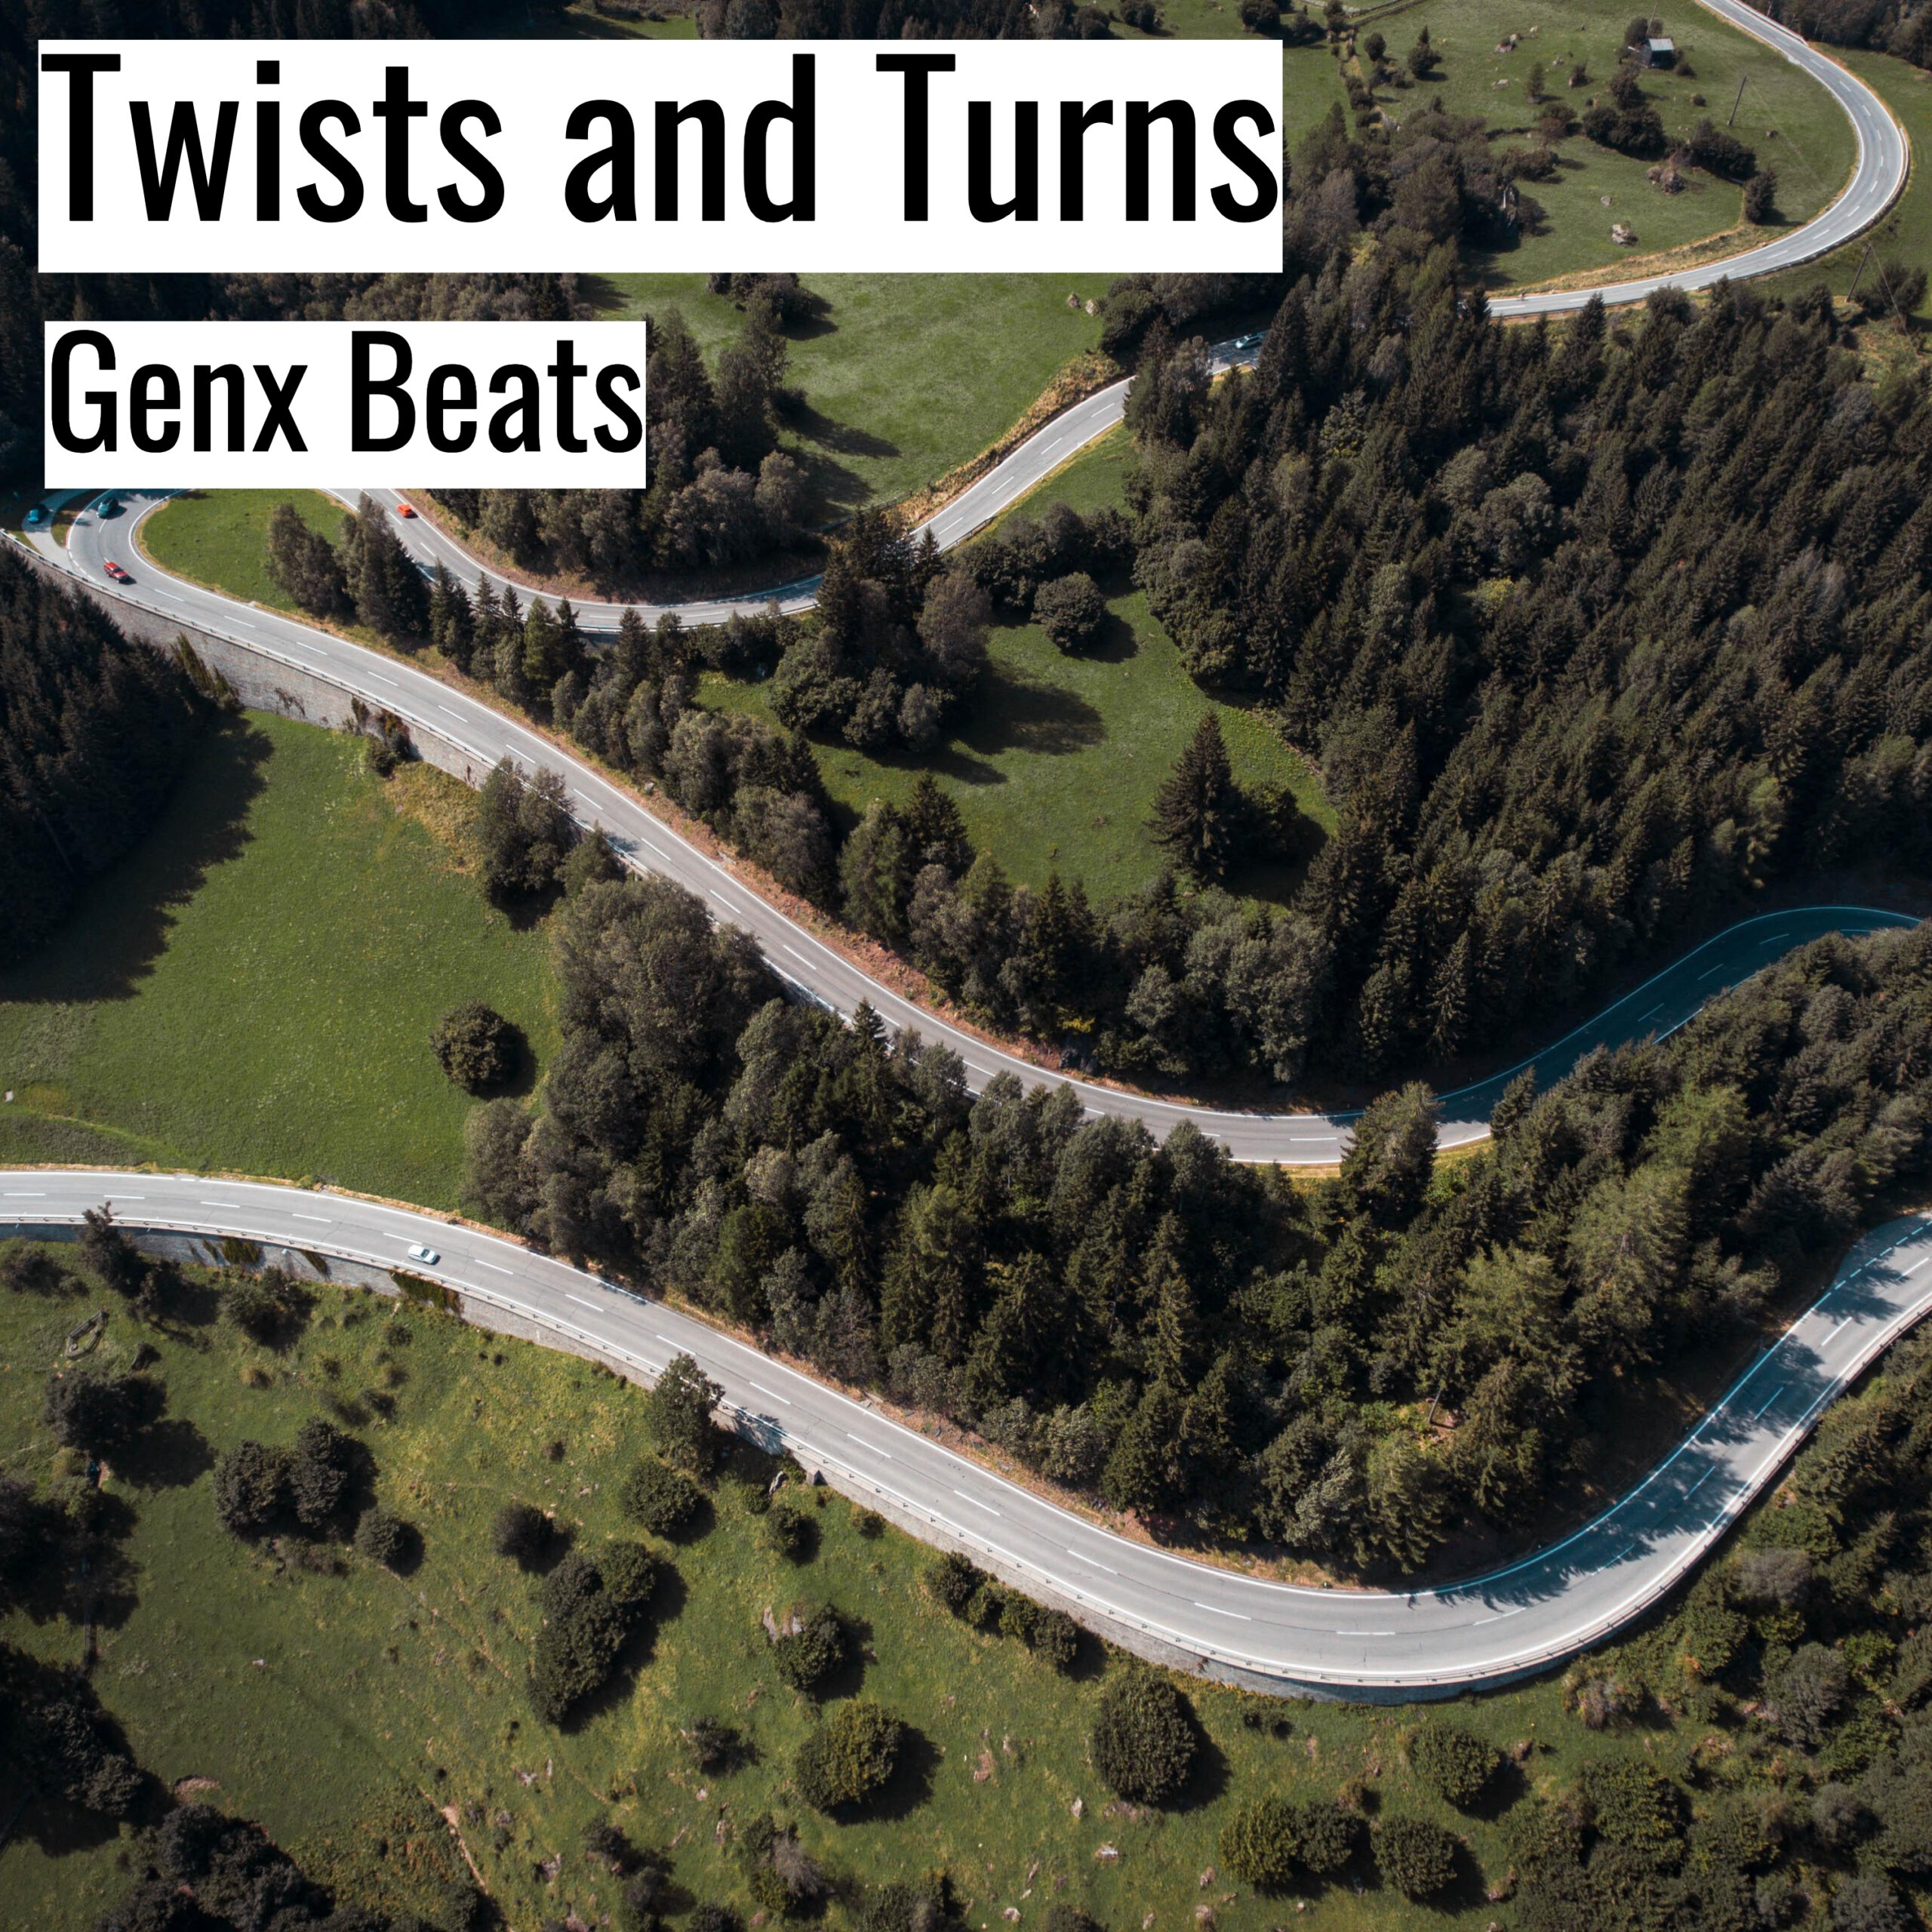 Twists and Turns scaled